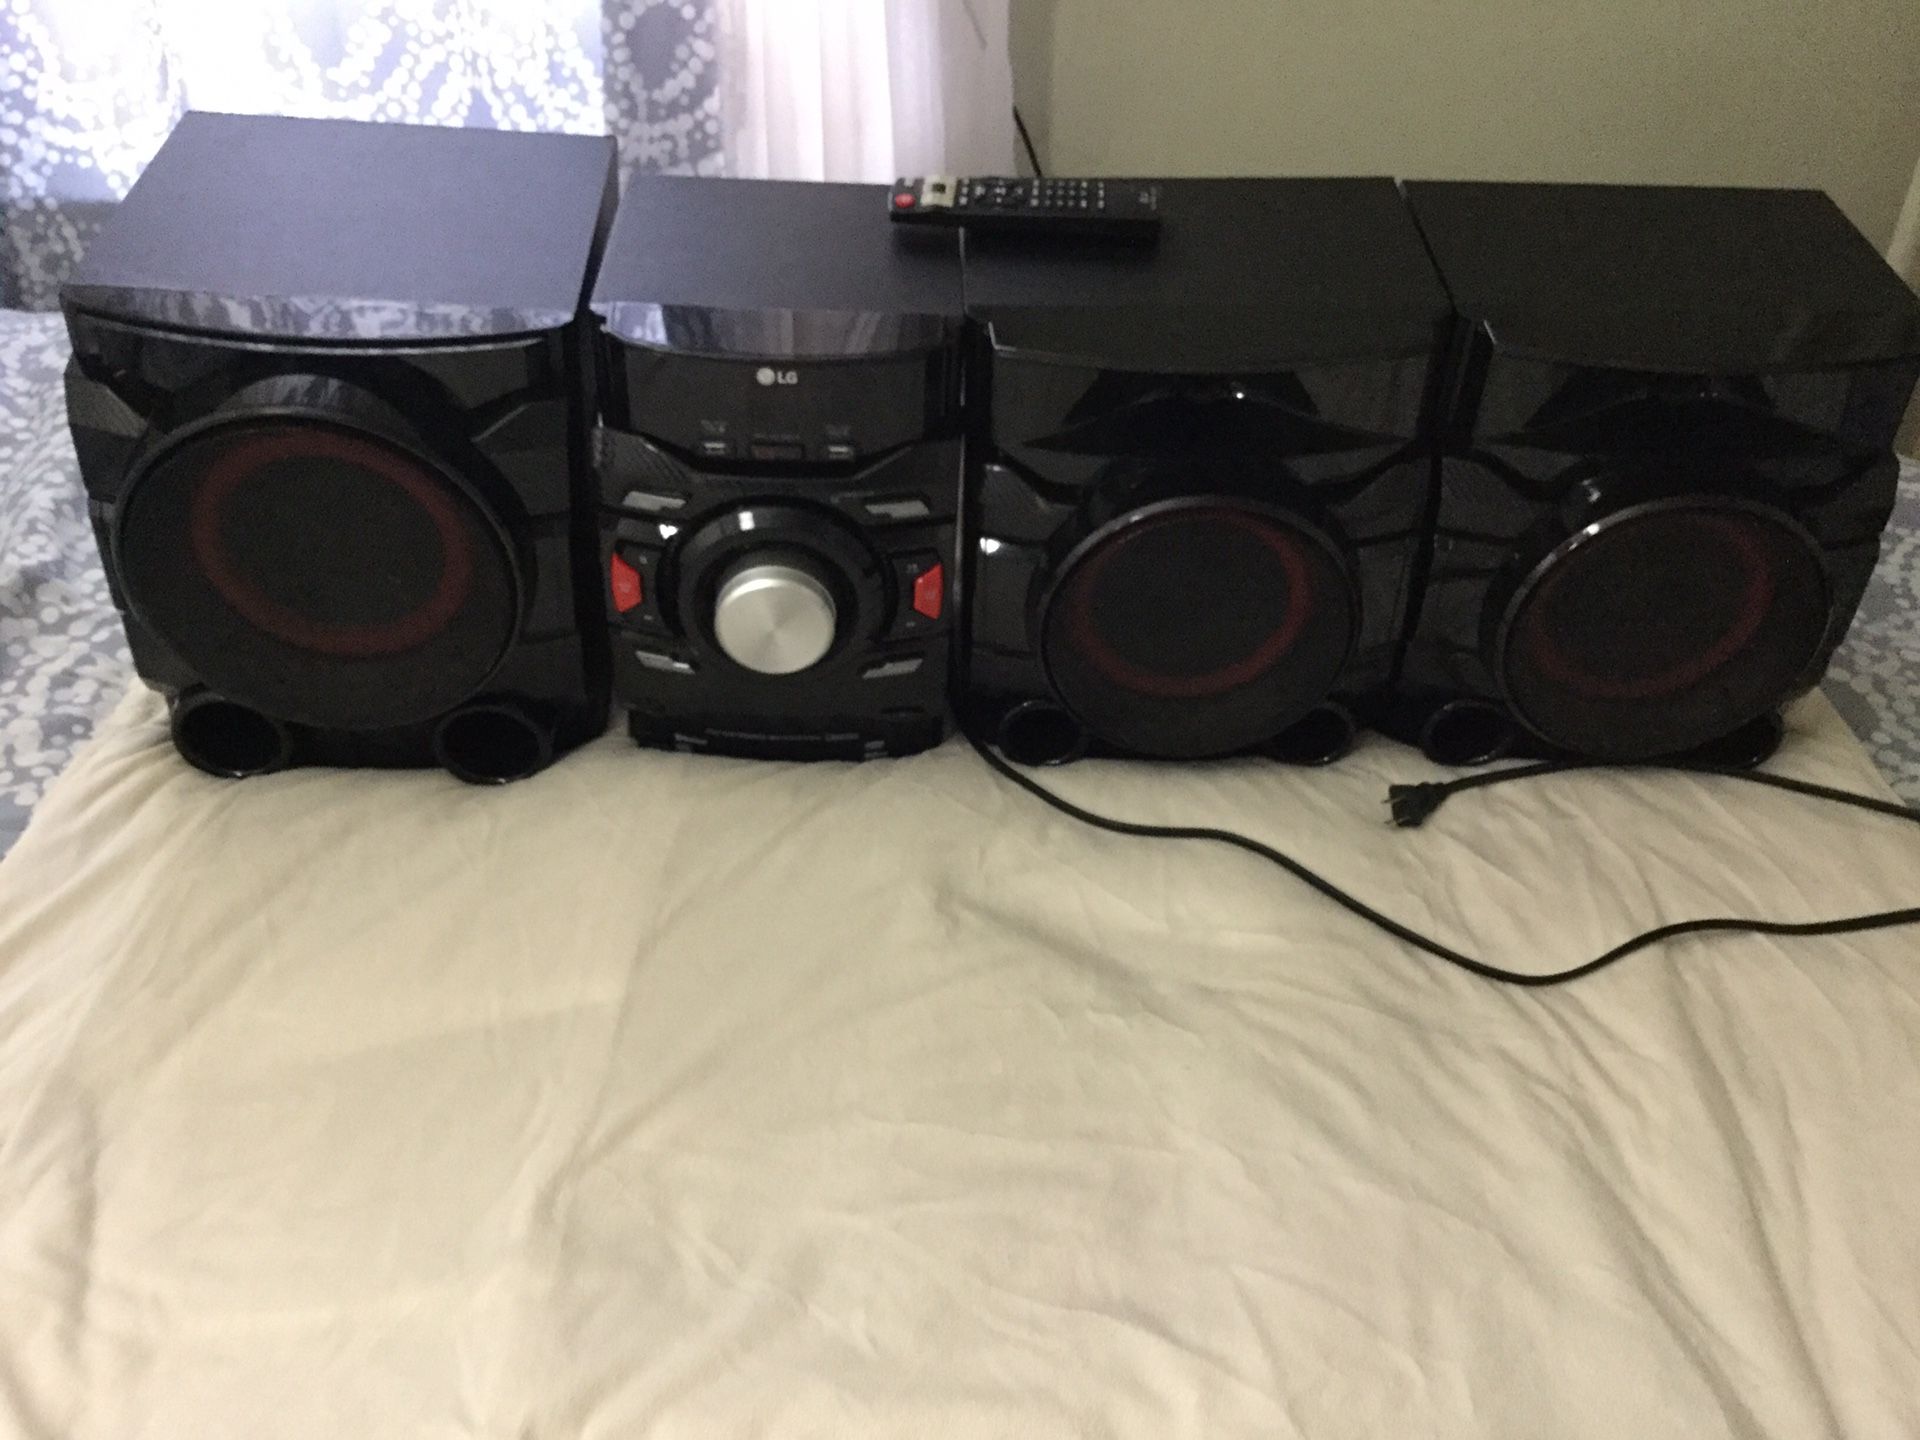 LG. Xboom 700W main unit and speaker stereo system combo set.